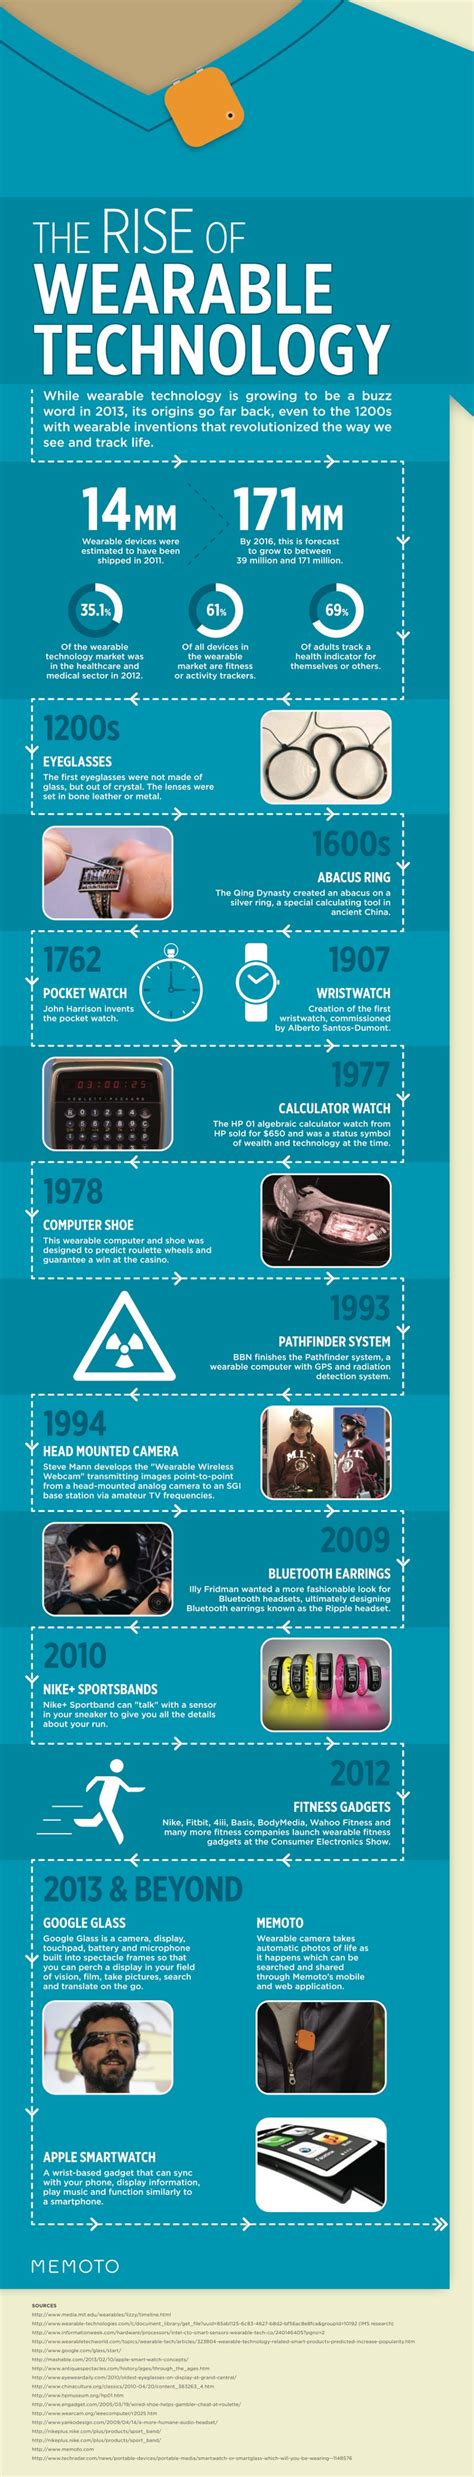 13 Latest Wearable Technology Statistics And Trends Wearable